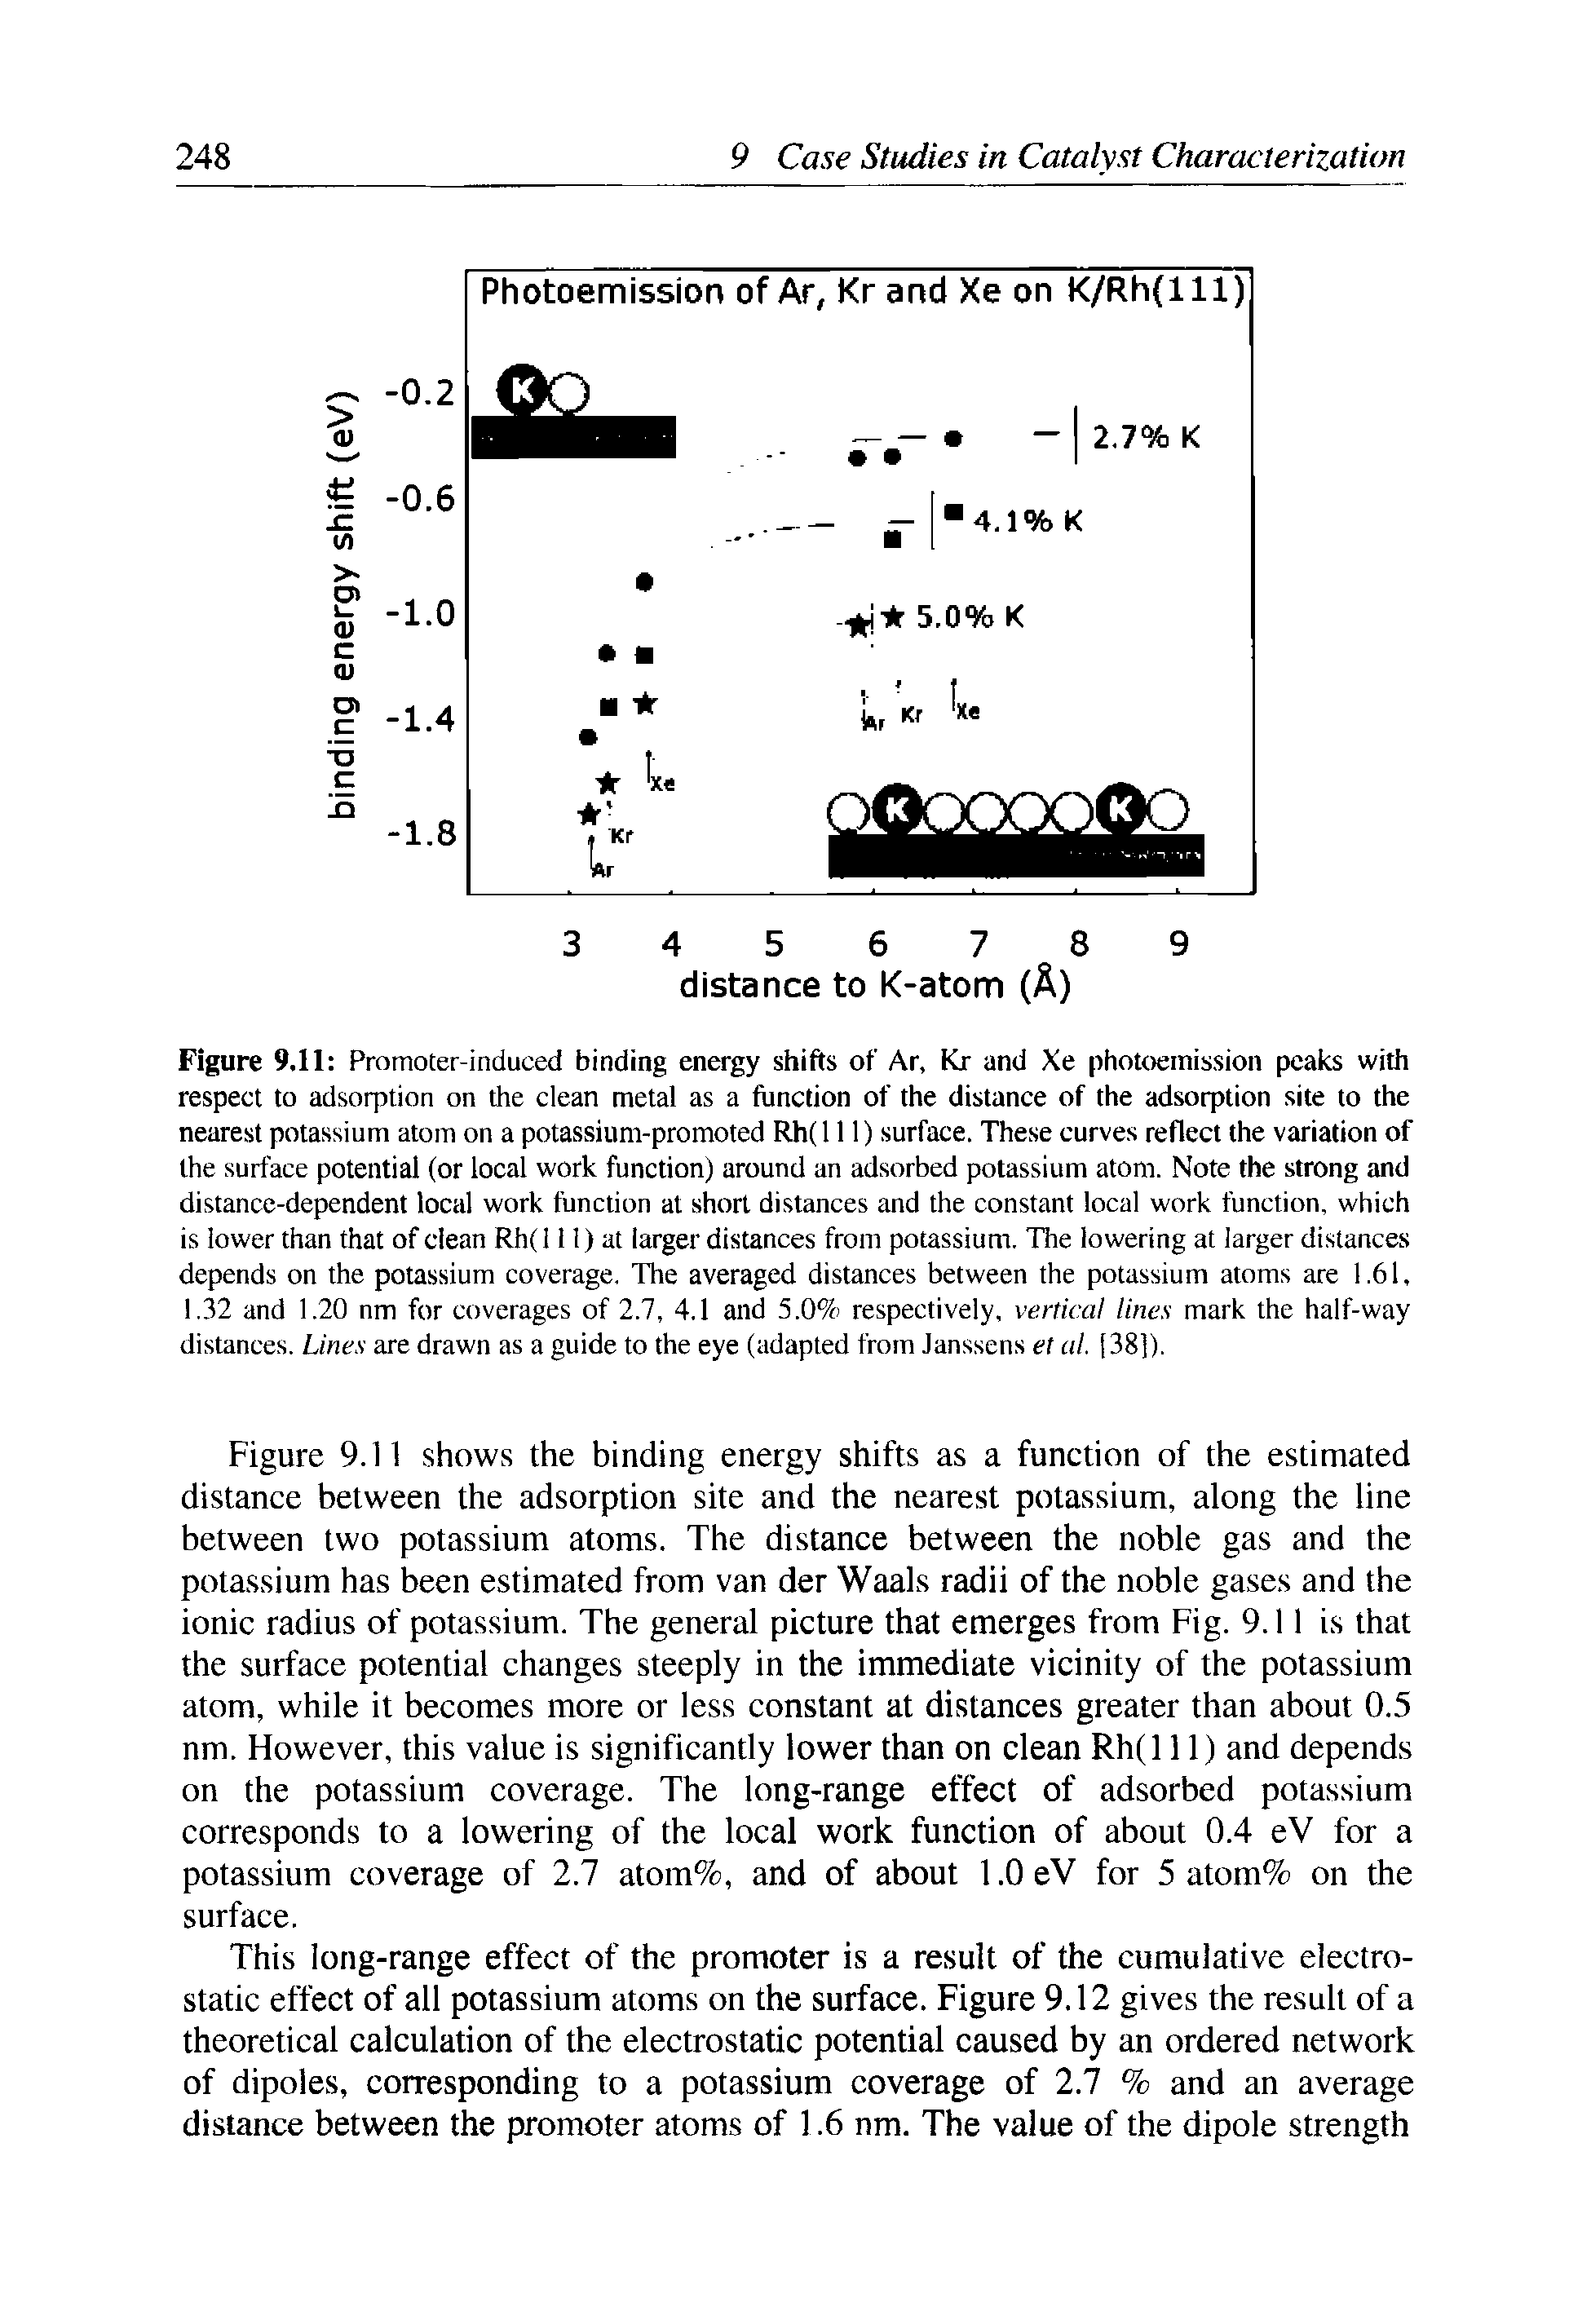 Figure 9.11 Promoter-induced binding energy shifts of Ar, Kr and Xe photoemission peaks with respect to adsorption on the clean metal as a function of the distance of the adsorption site to the nearest potassium atom on a potassium-promoted Rh( 111) surface. These curves reflect the variation of the surface potential (or local work function) around an adsorbed potassium atom. Note the strong and distance-dependent local work function at short distances and the constant local work function, which is lower than that of clean Rh( 111) at larger distances from potassium. The lowering at larger distances depends on the potassium coverage. The averaged distances between the potassium atoms are 1.61, 1.32 and 1.20 nm for coverages of 2.7, 4.1 and 5.0% respectively, vertical lines mark the half-way distances. Lines are drawn as a guide to the eye (adapted from Janssens et al. [38]).